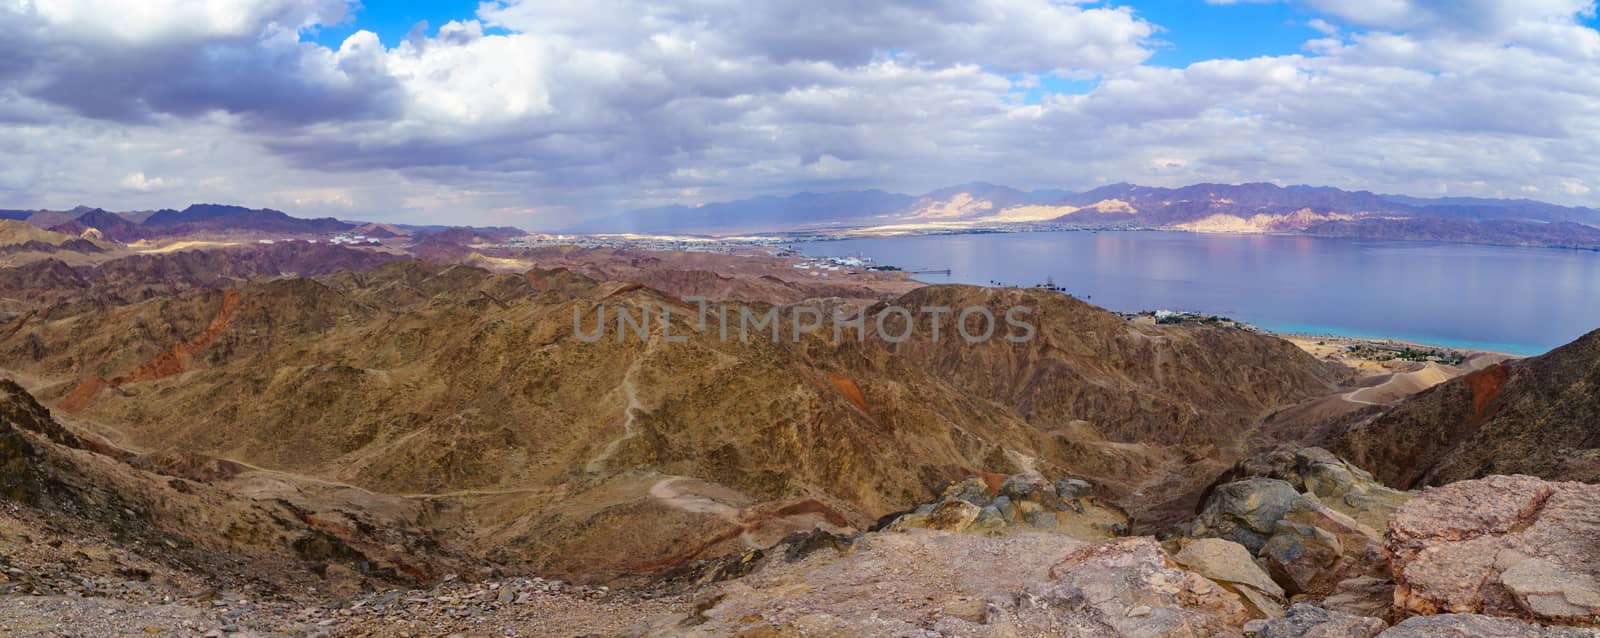 Mount Tzfahot and the gulf of Aqaba by RnDmS